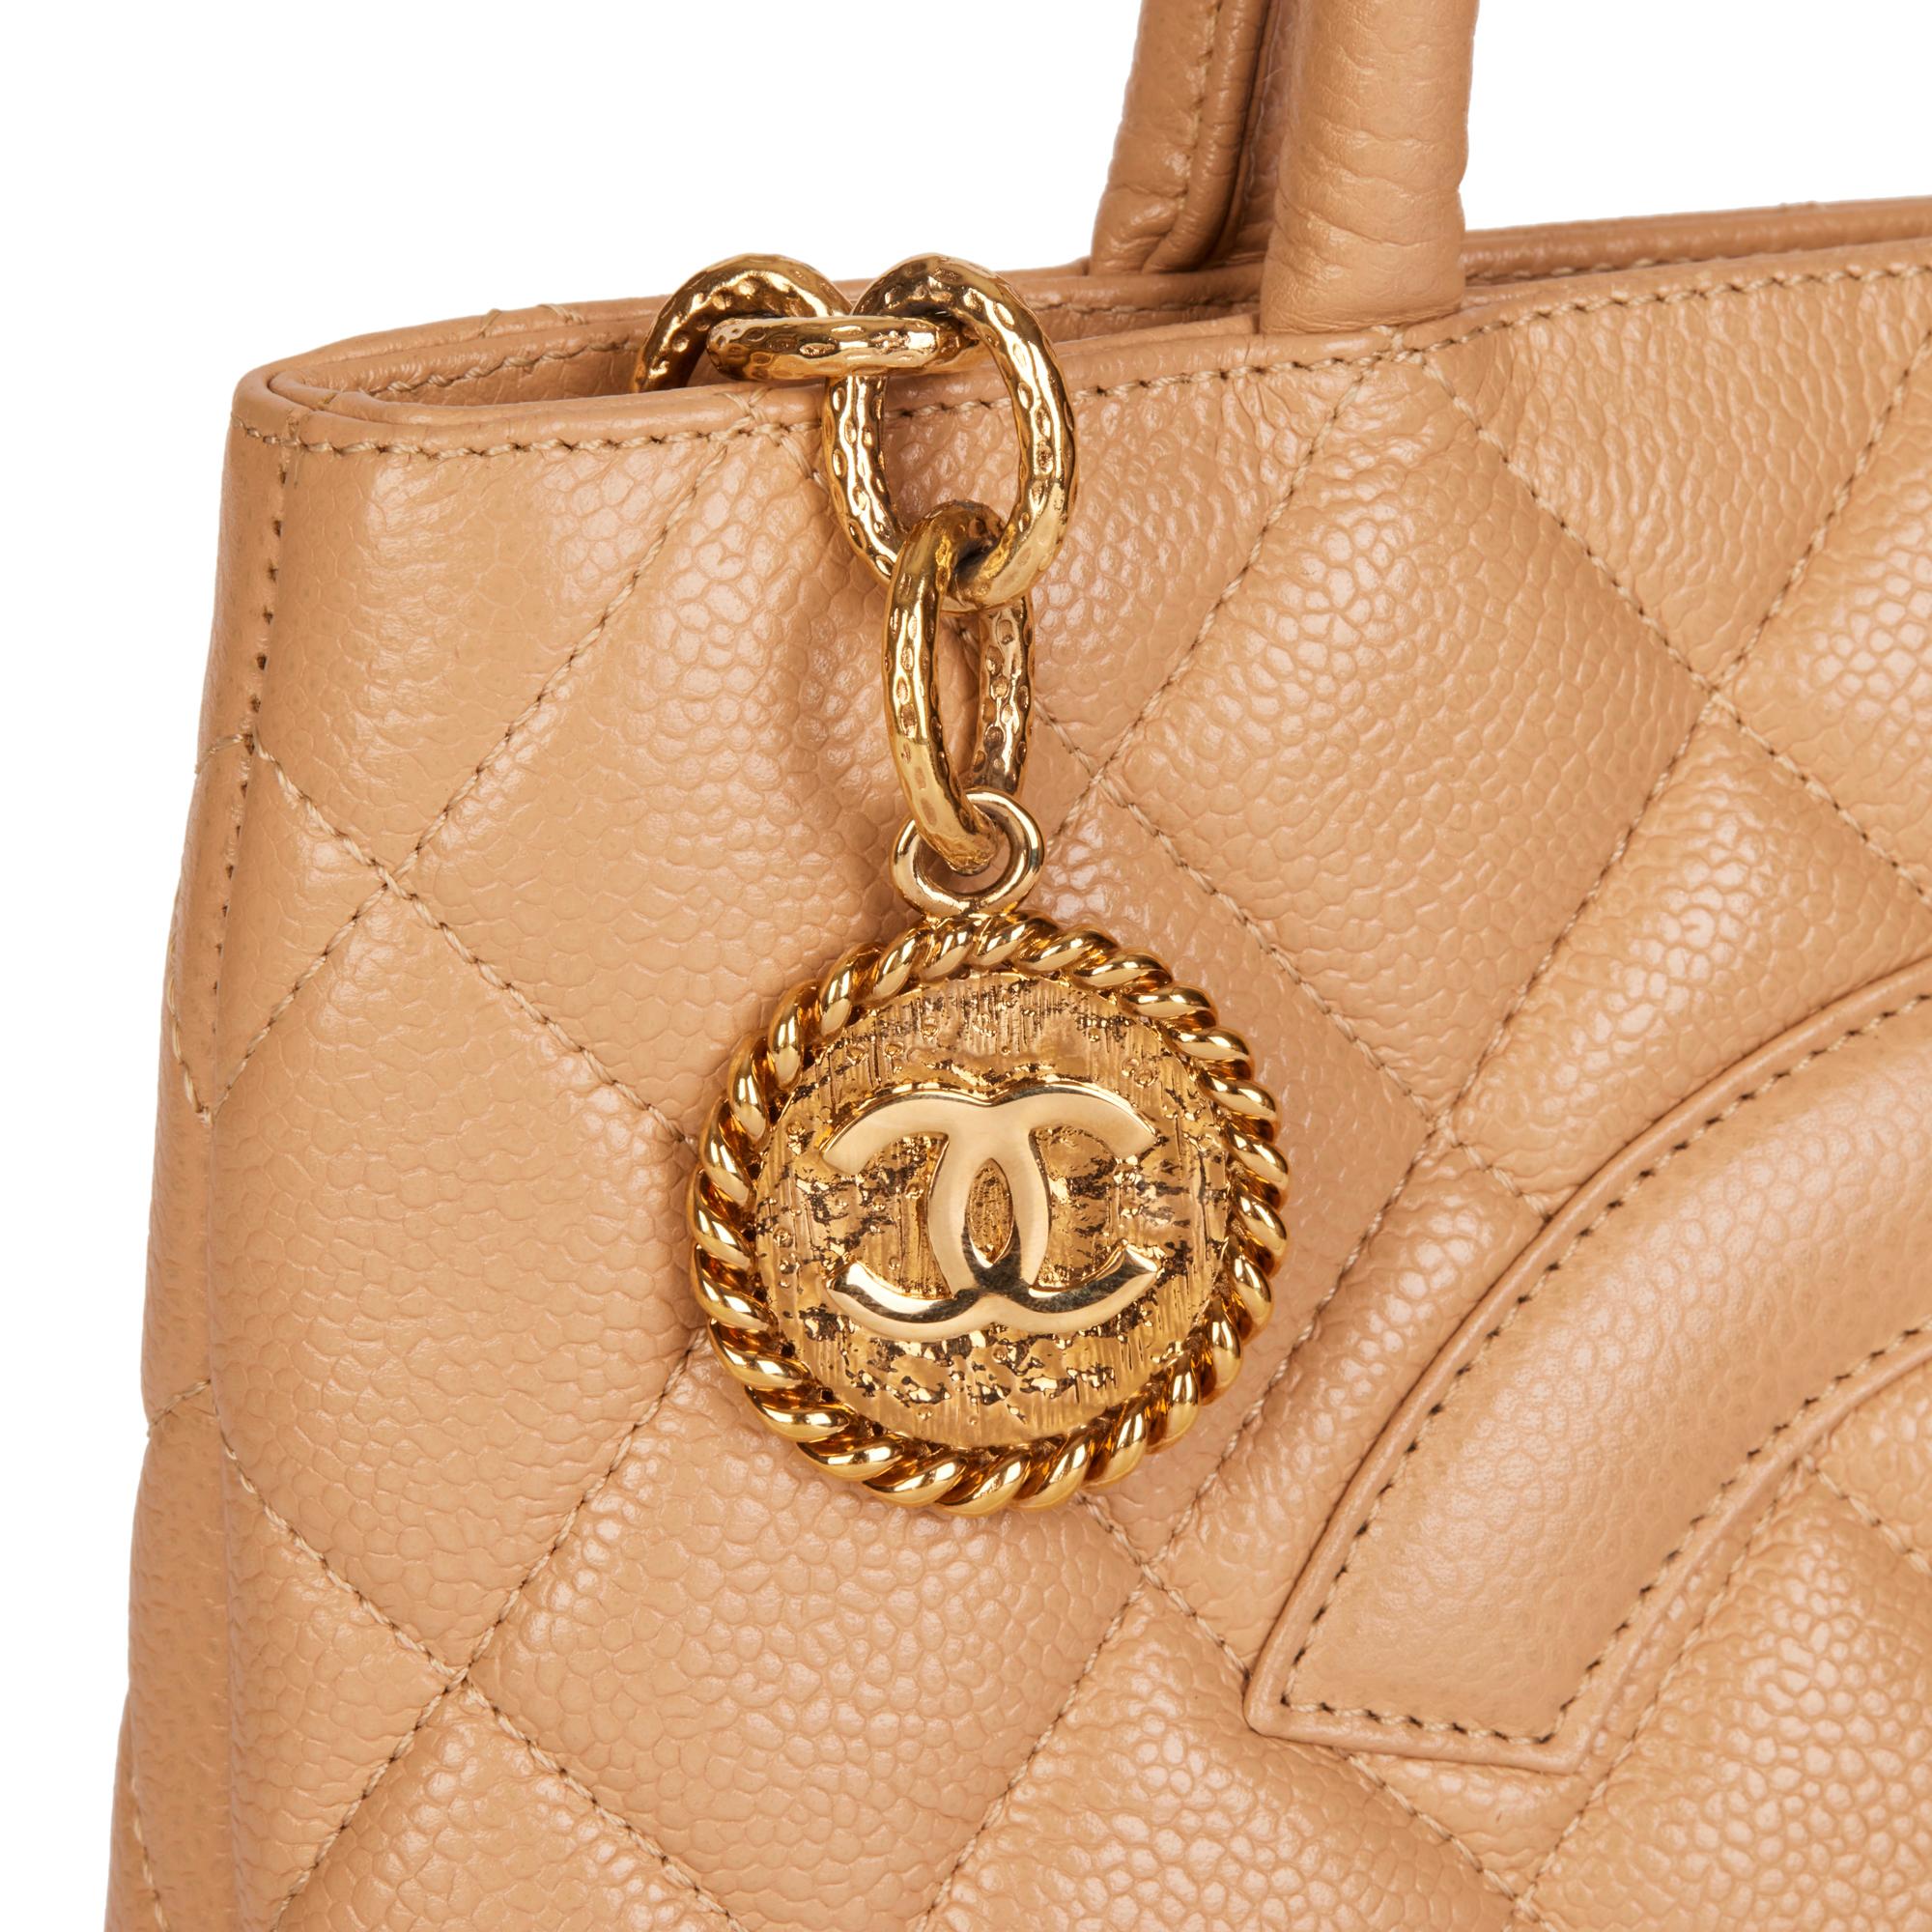 CHANEL Beige Quilted Caviar Leather Vintage Medallion Tote 1